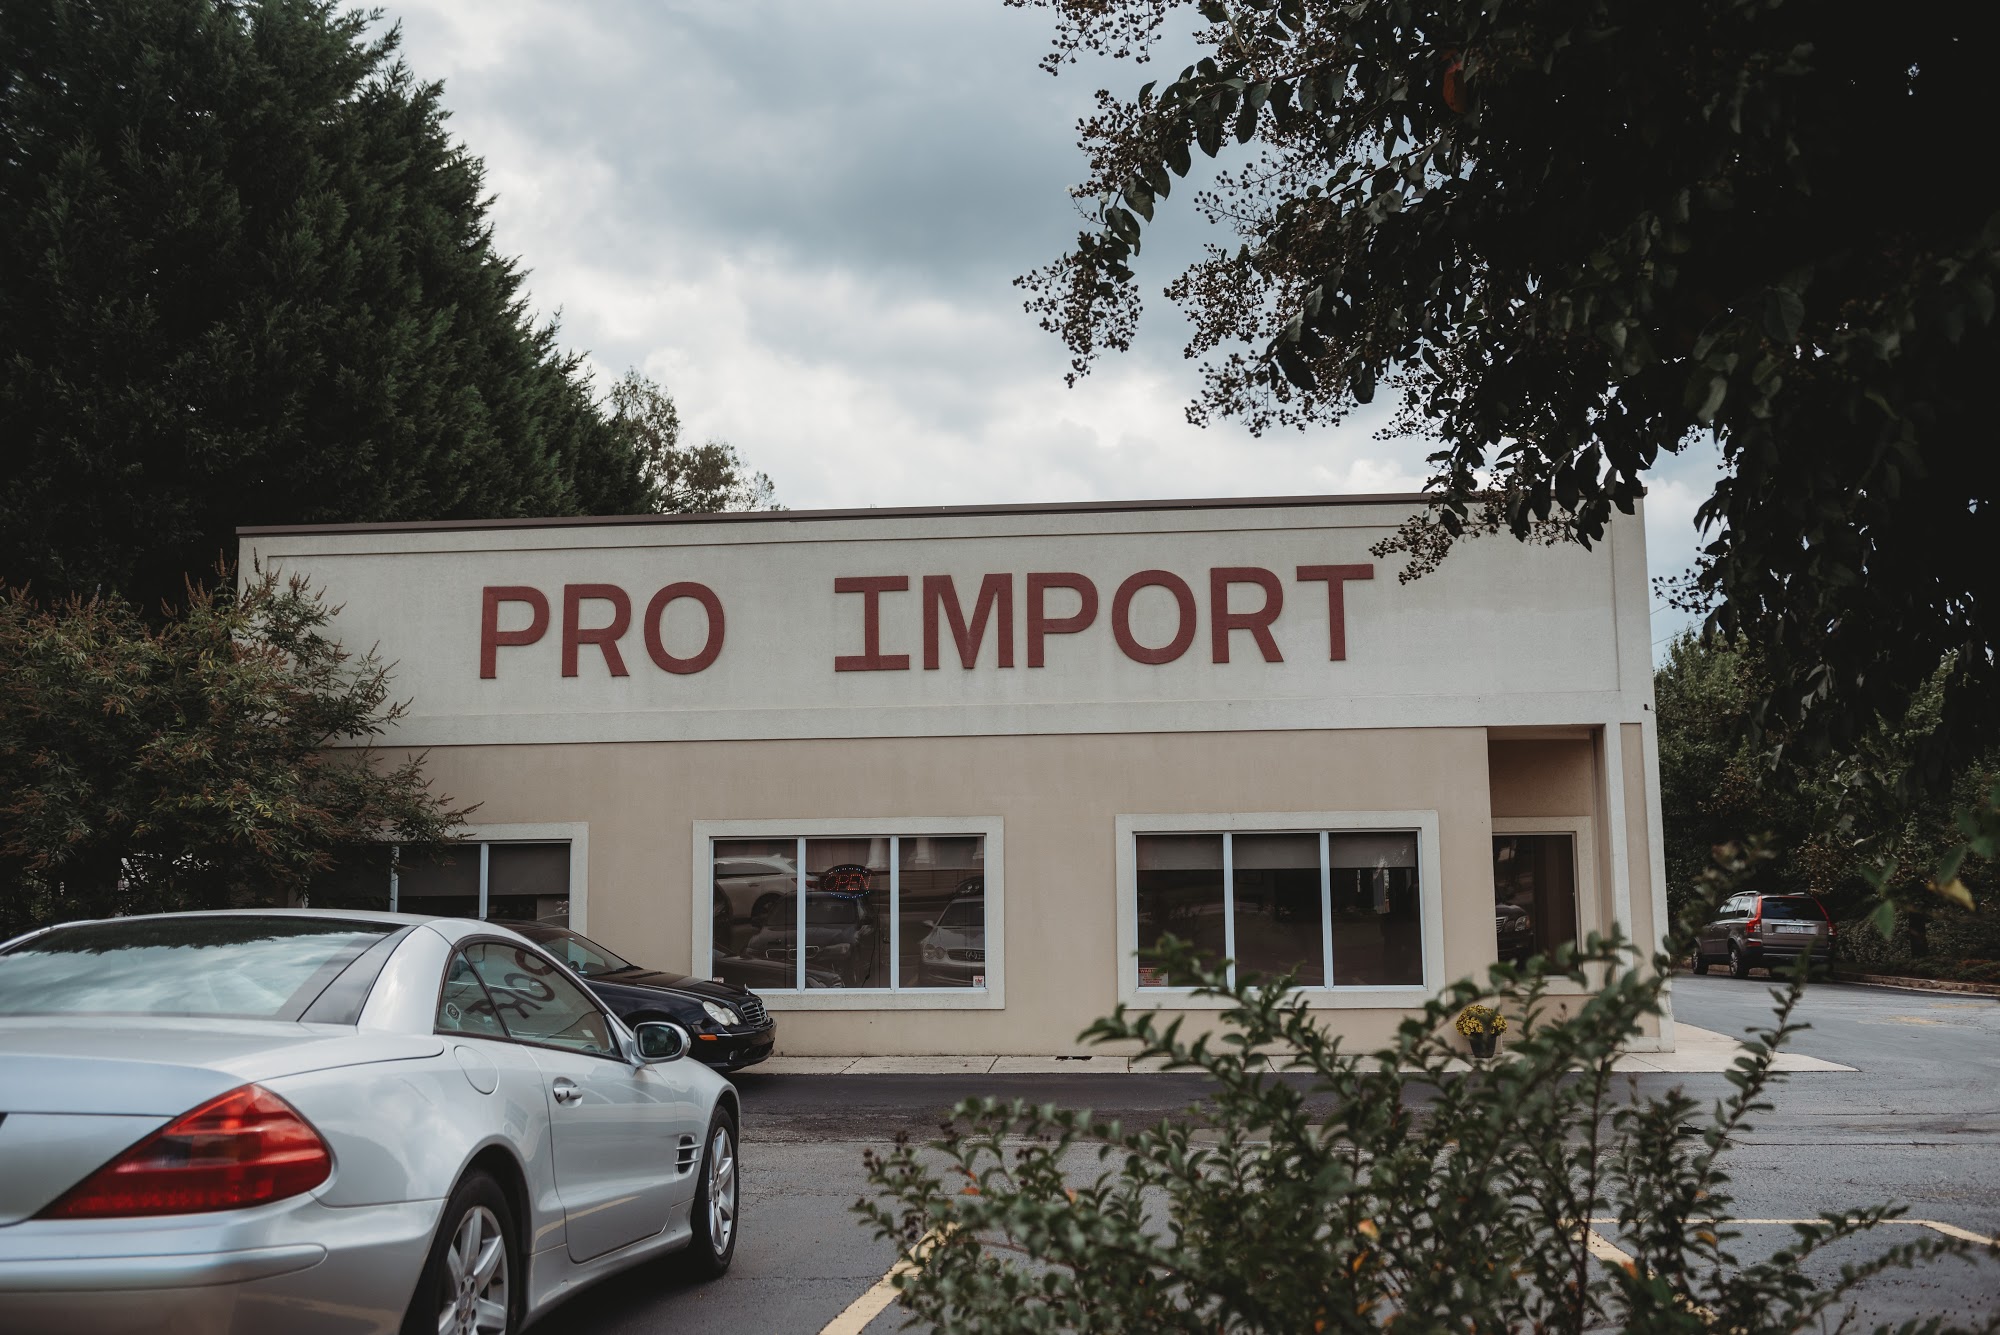 Pro Import Automotive Service and Repair